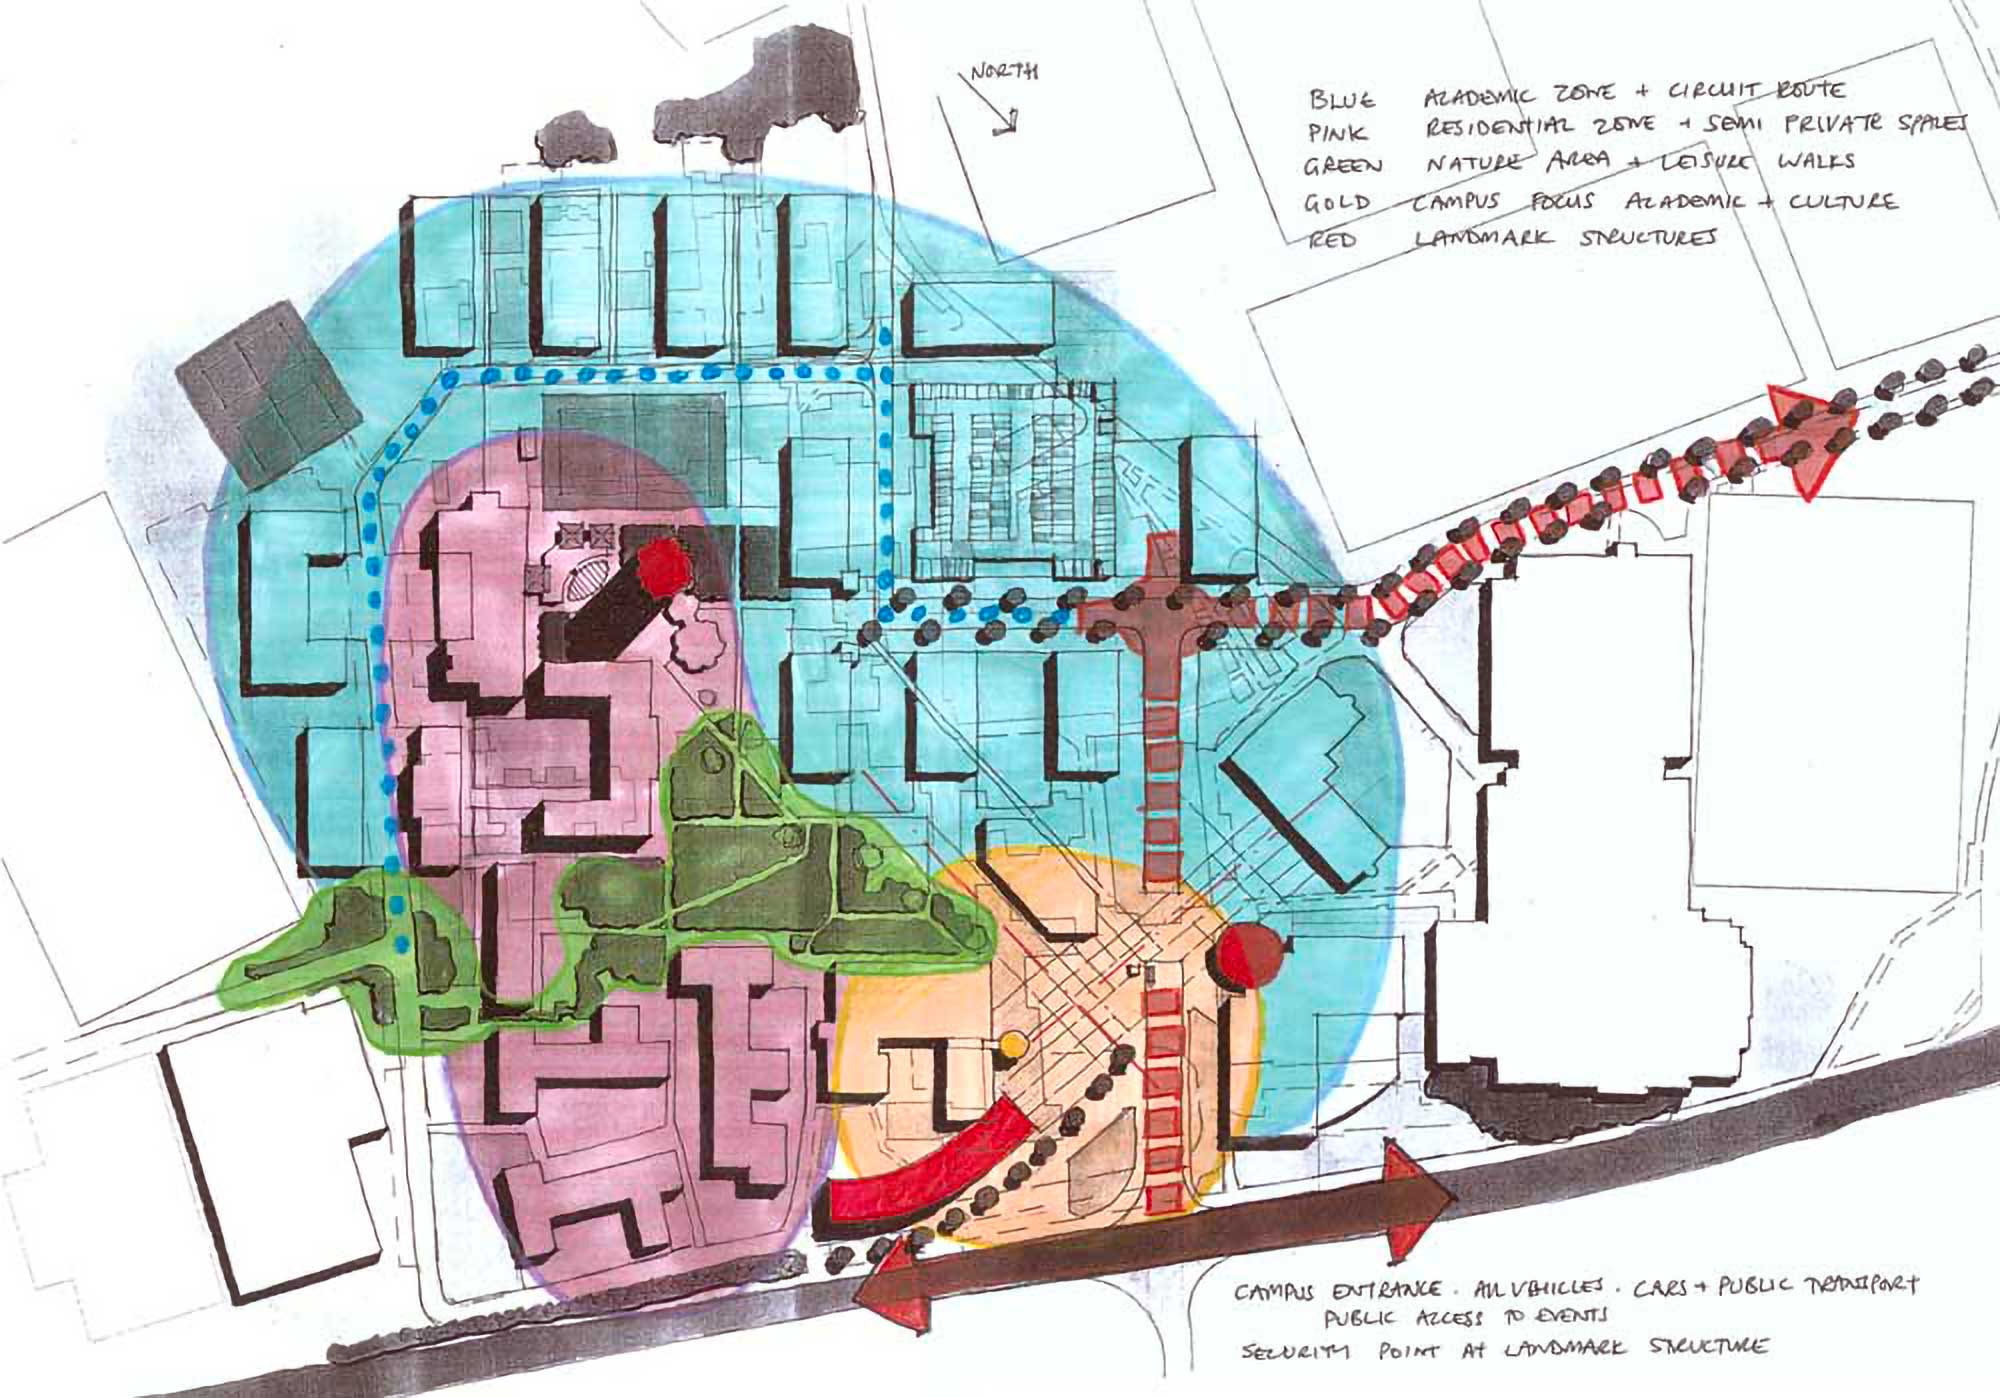 Colourful illustration showing the various areas and aspects of the campus